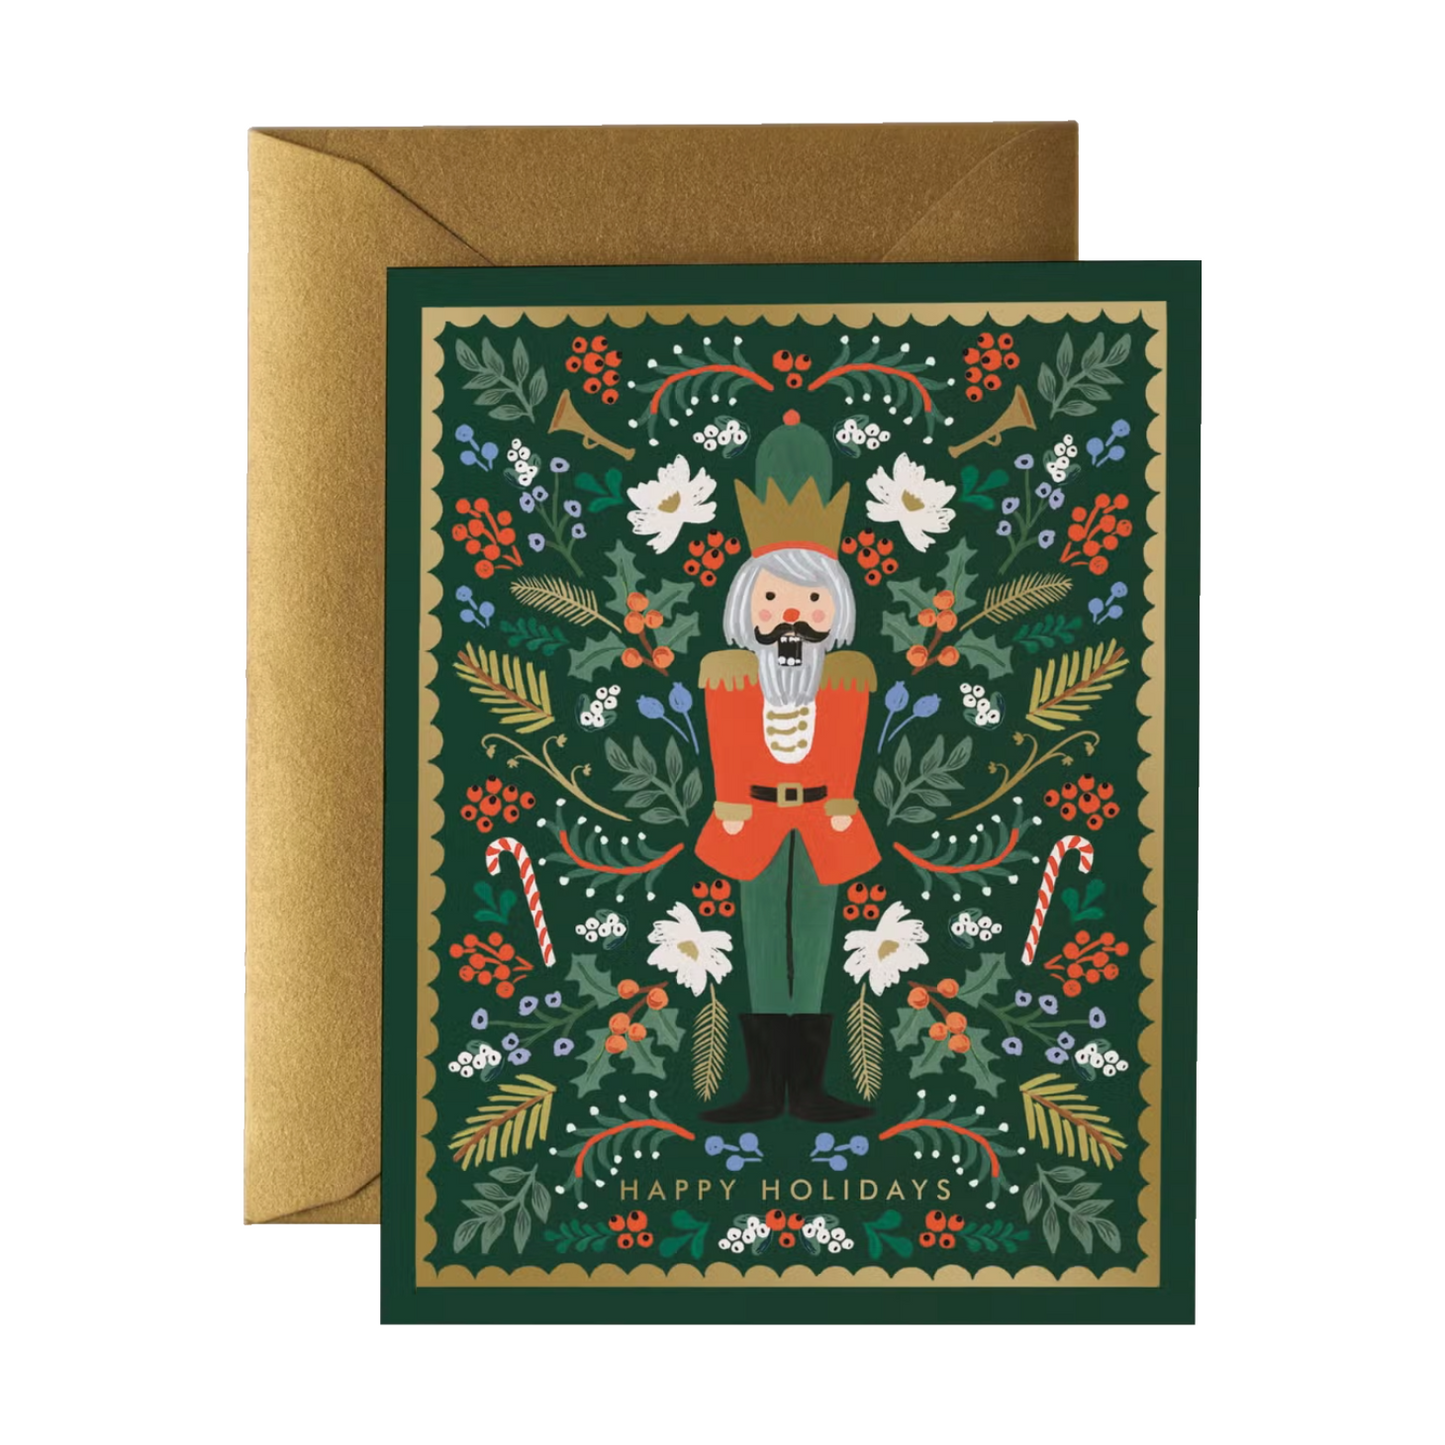 Evergreen Nutcracker Card by Rifle Paper Co.